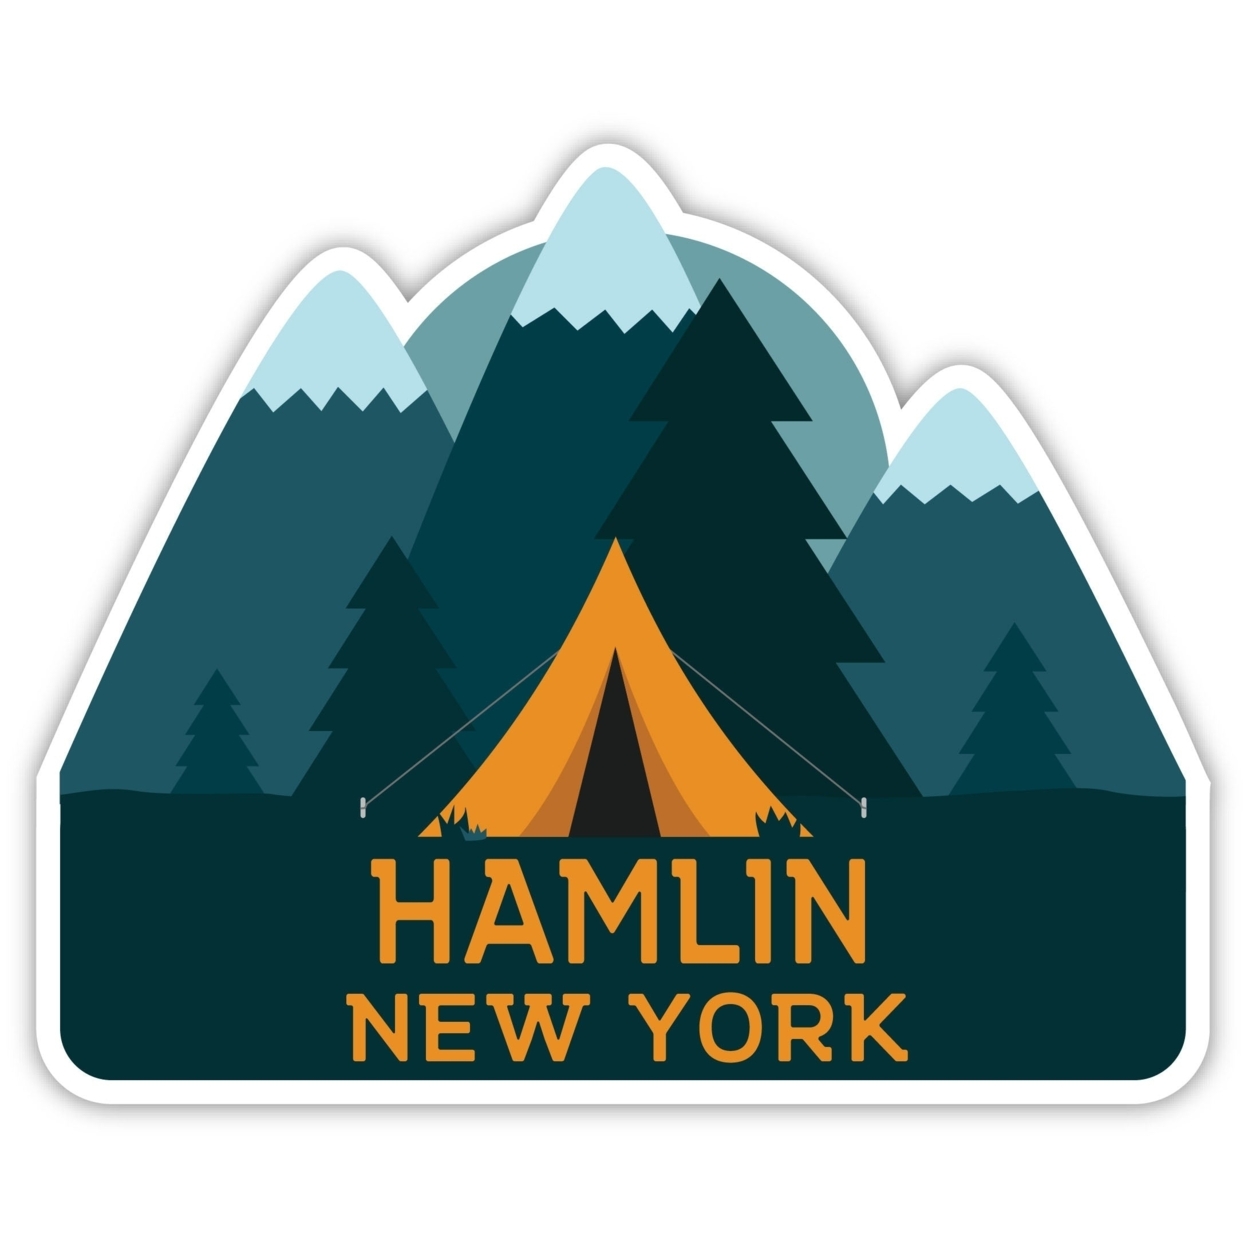 Hamlin New York Souvenir Decorative Stickers (Choose Theme And Size) - 4-Pack, 4-Inch, Tent